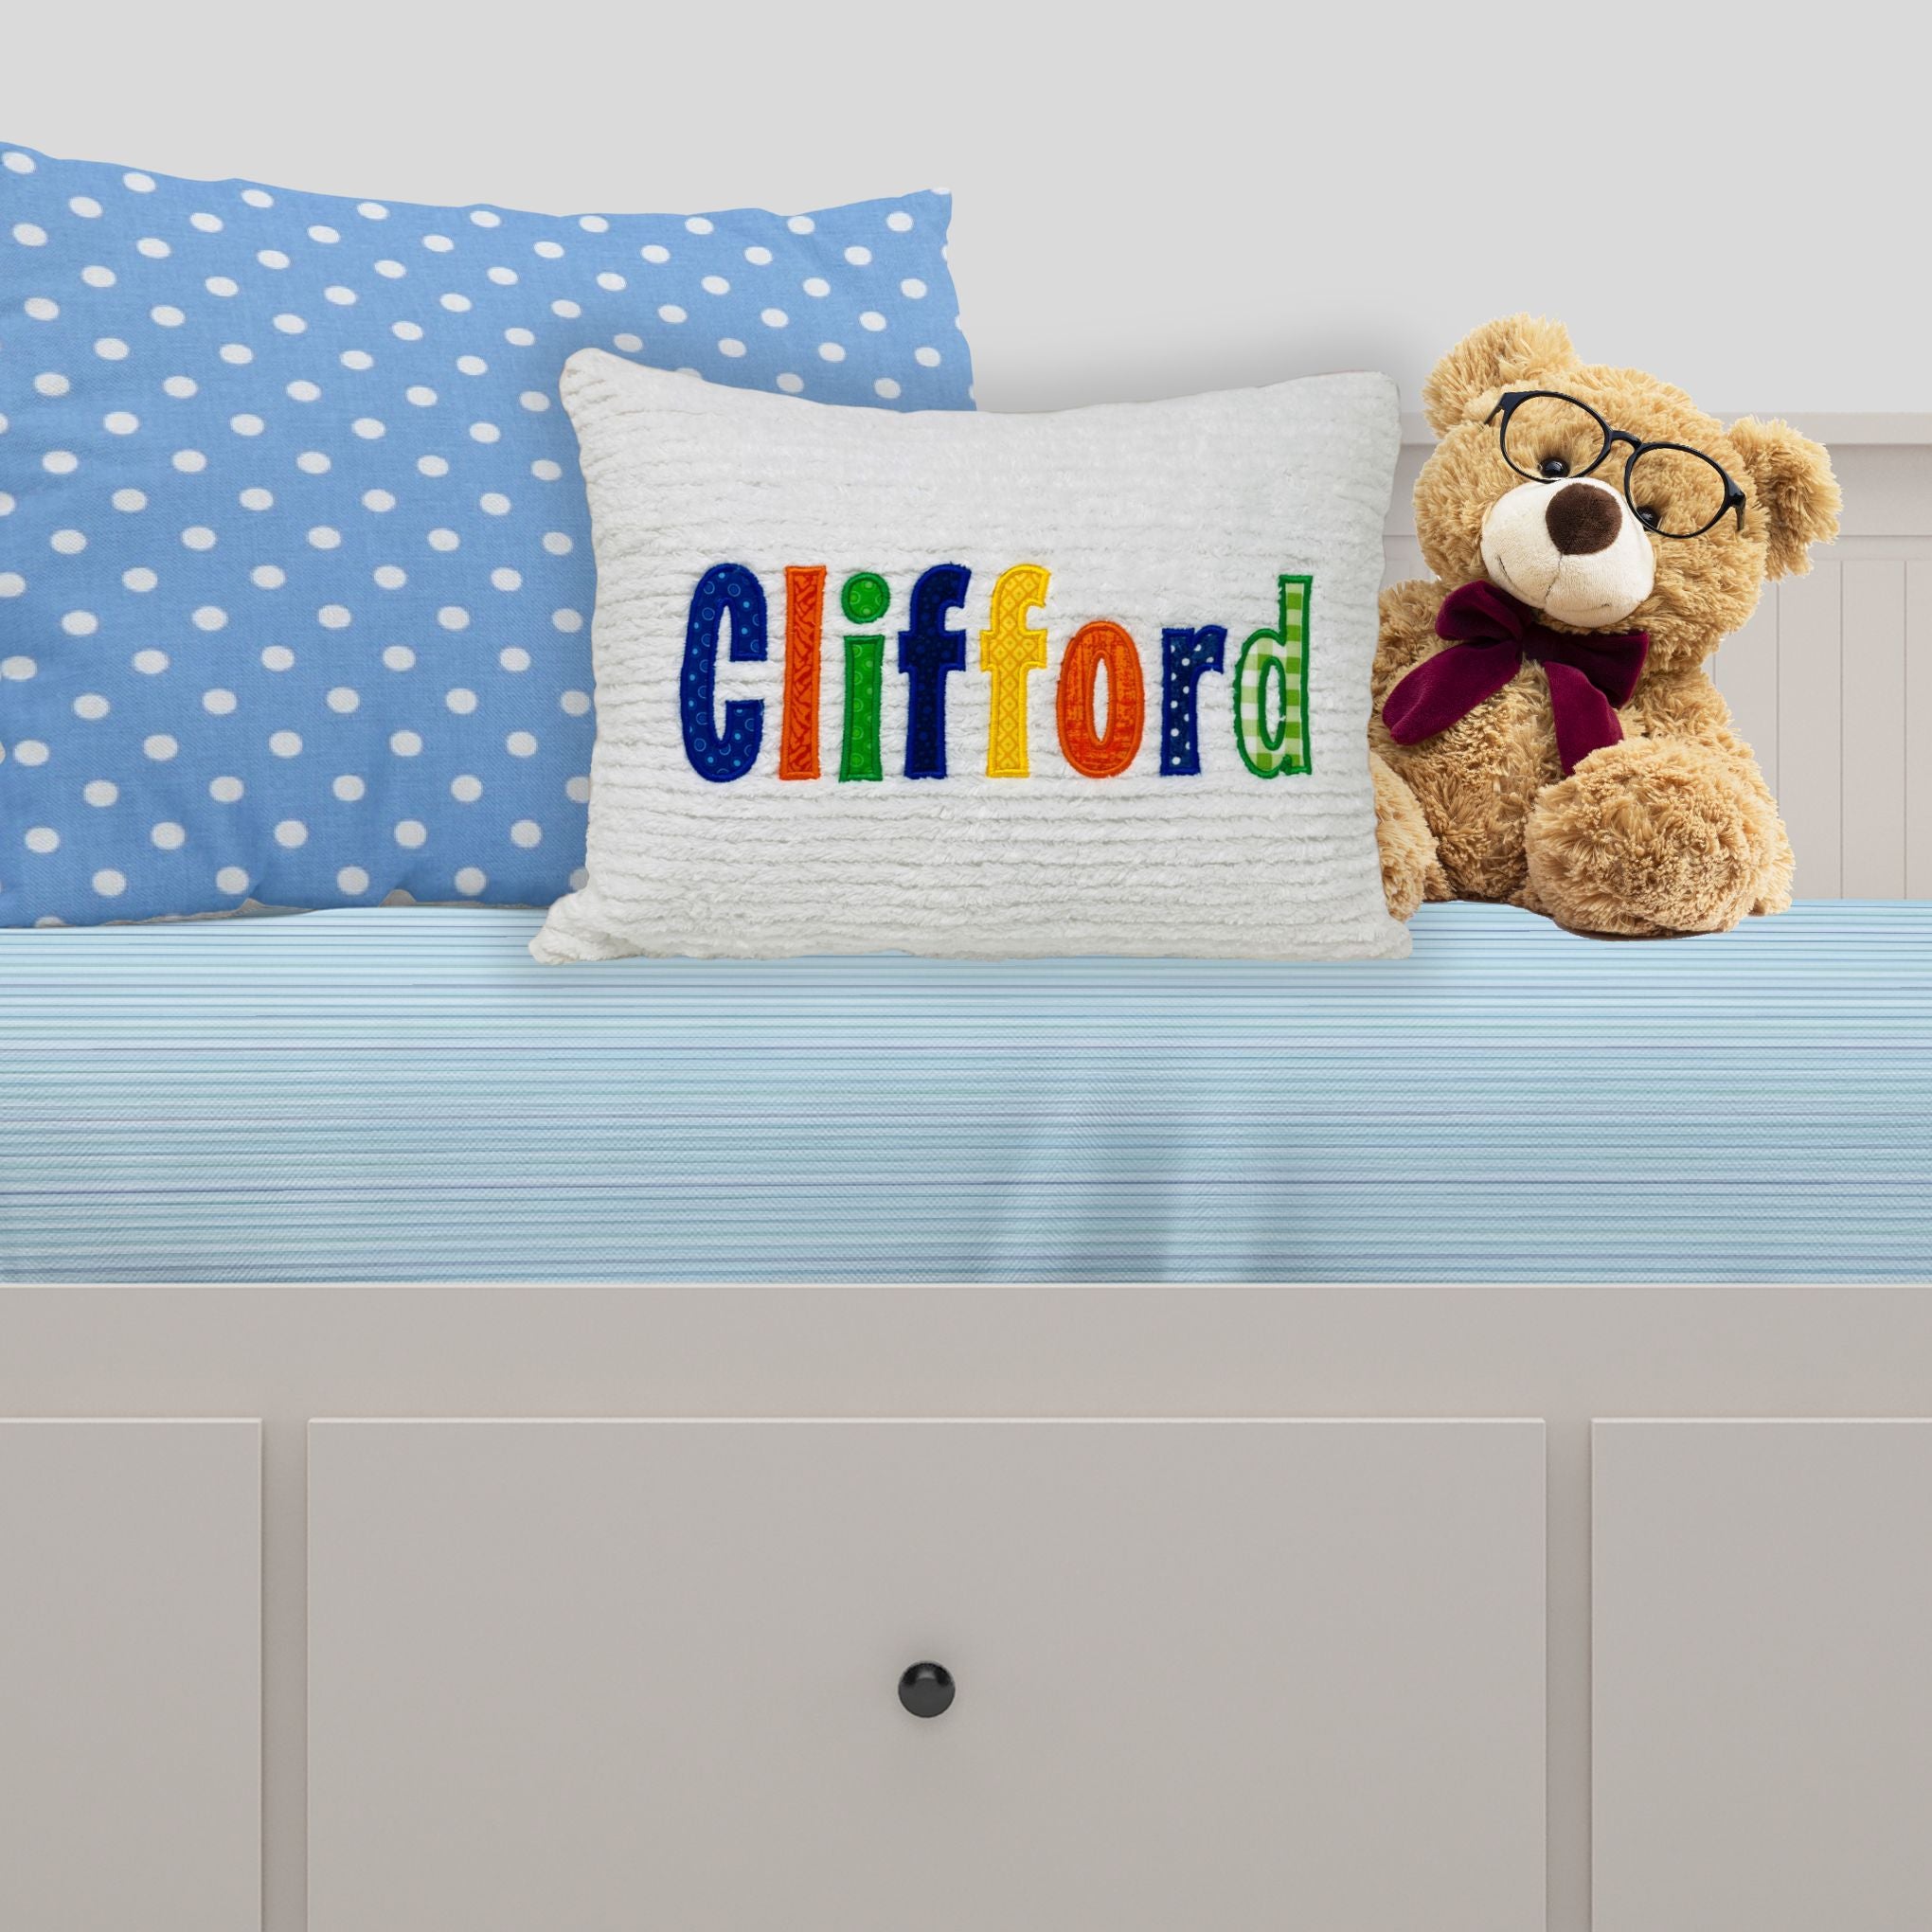 Chenille name pillow with colorful applique letters 